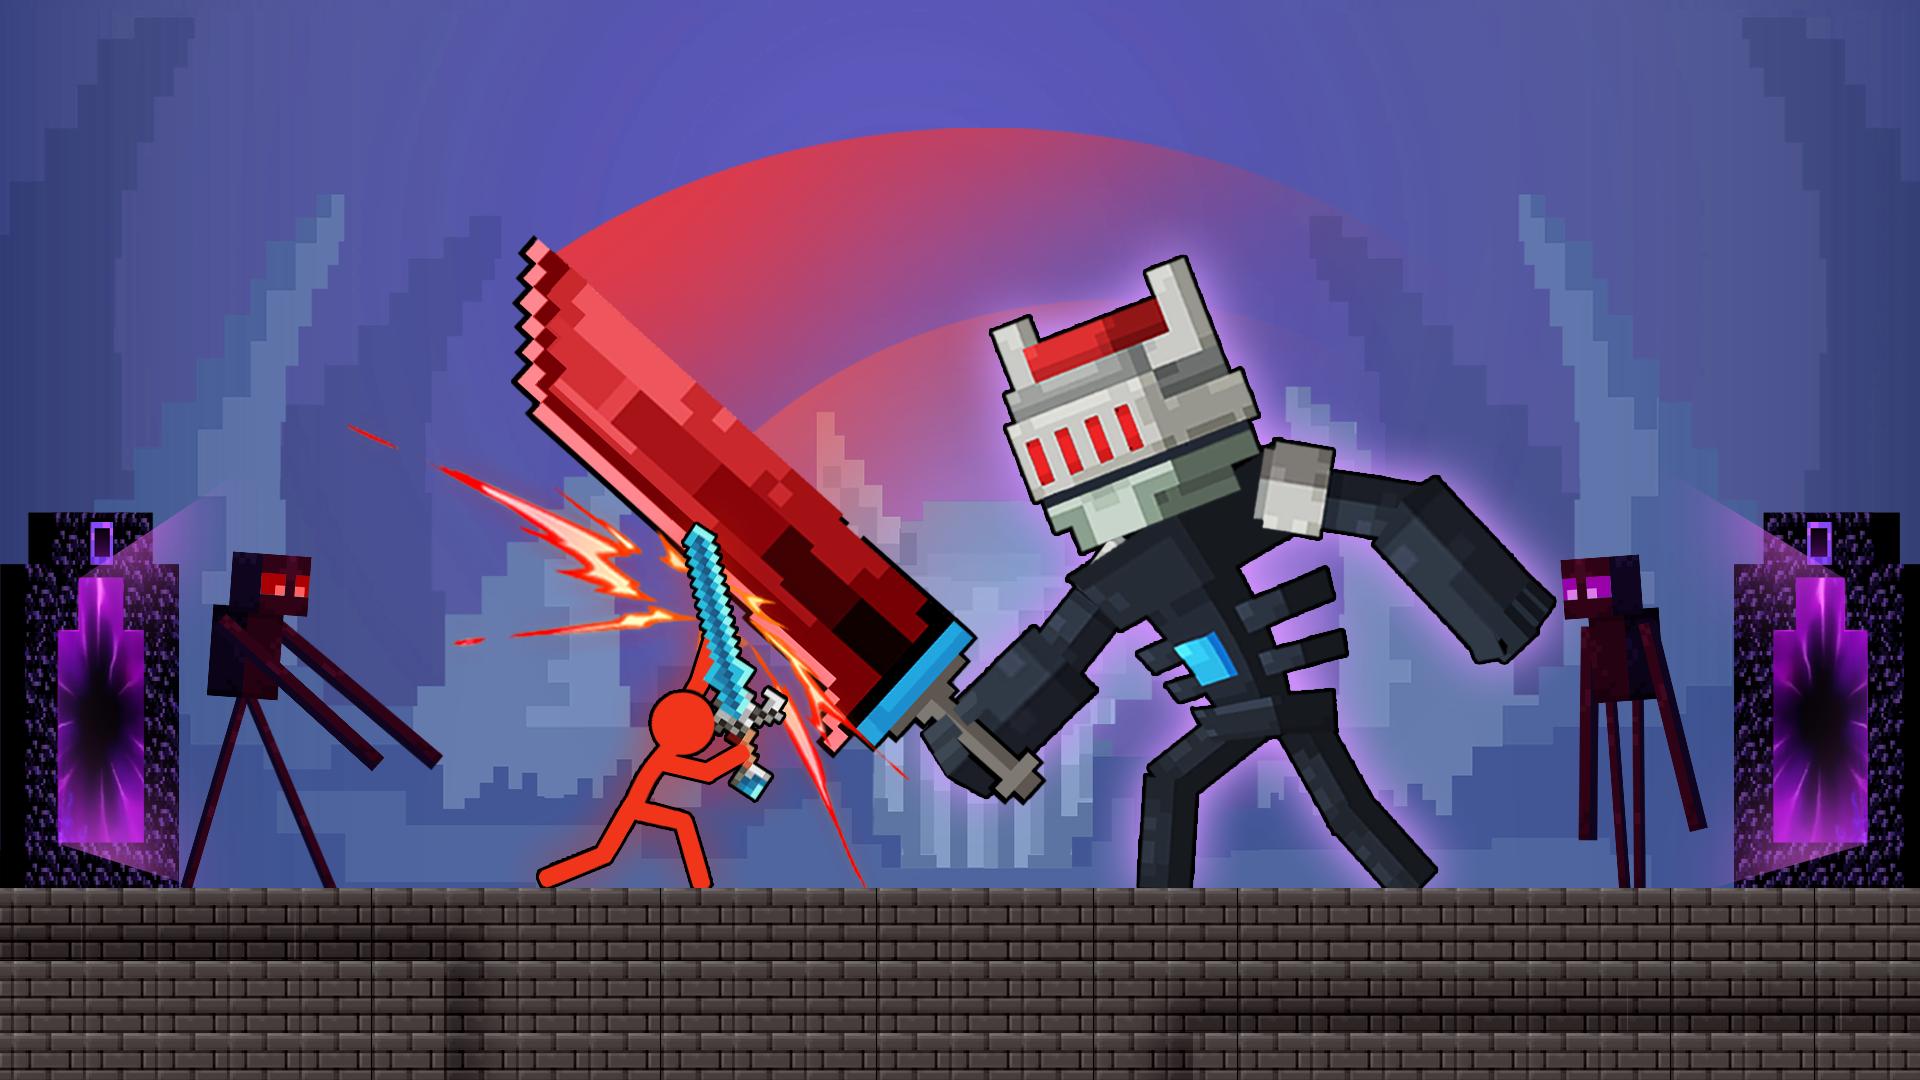 Minecraft Characters Invade Fantastic Stickman Animation